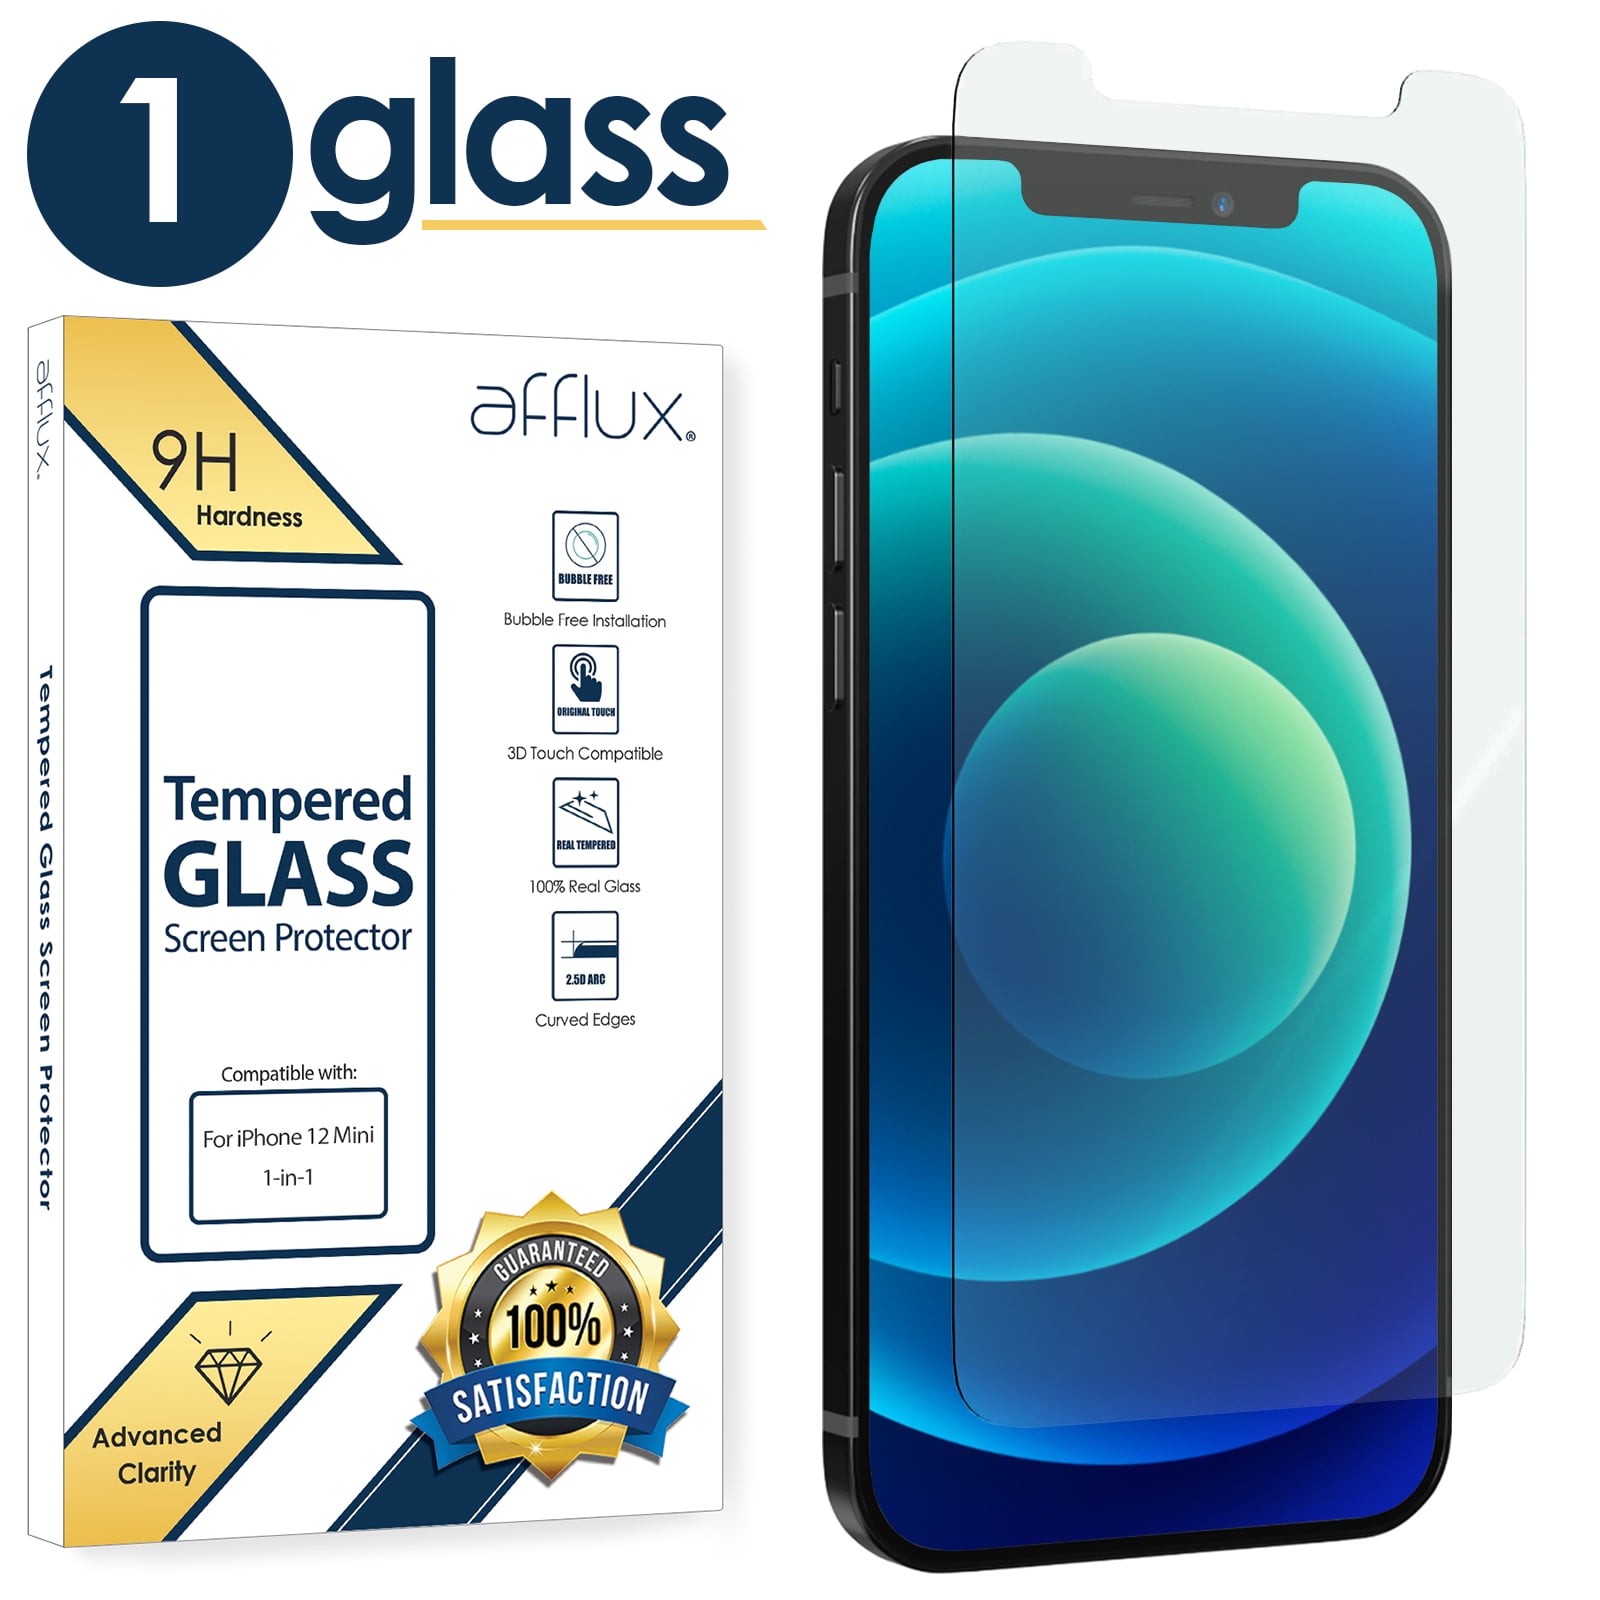 Tempered Glass Screen Protector Easy Bubble-Free Installation HD Ultra Clear shatterproof with 9H Hardness and Anti Fingerprint Oleo-phobic Coating For Samsung Galaxy J6 2018 Galaxy J6 2 PACK